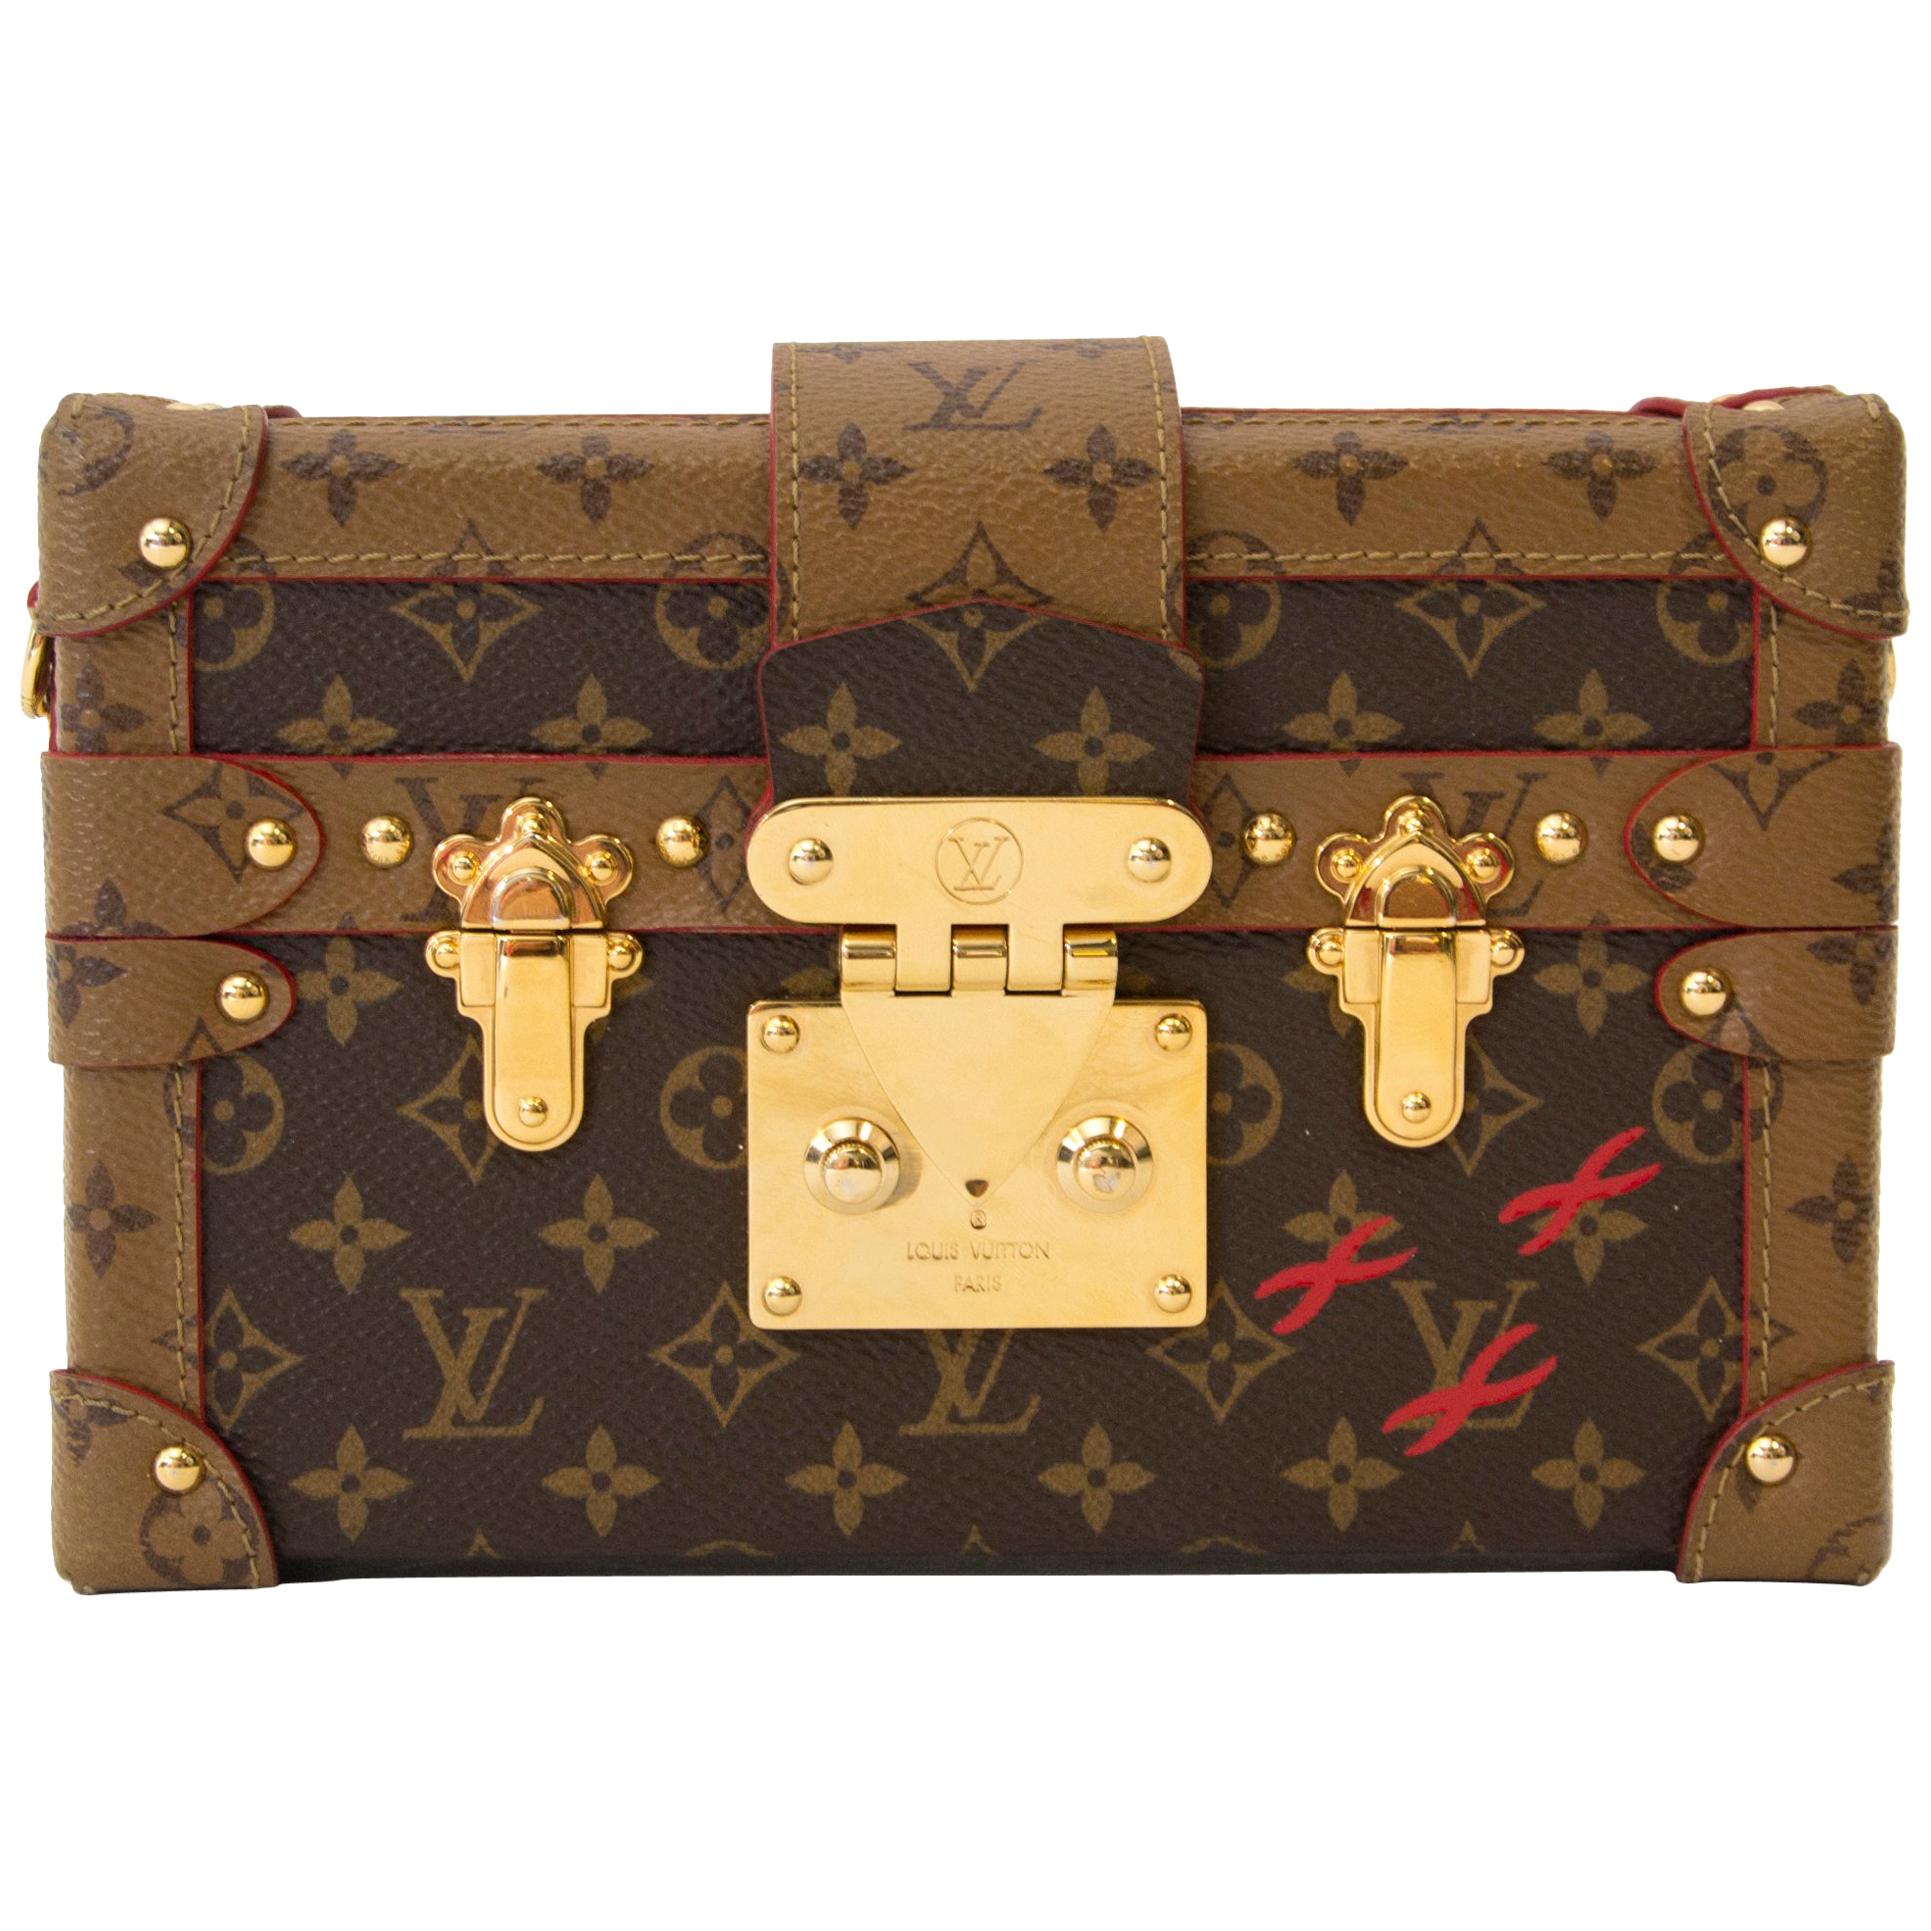 lv petite malle limited edition